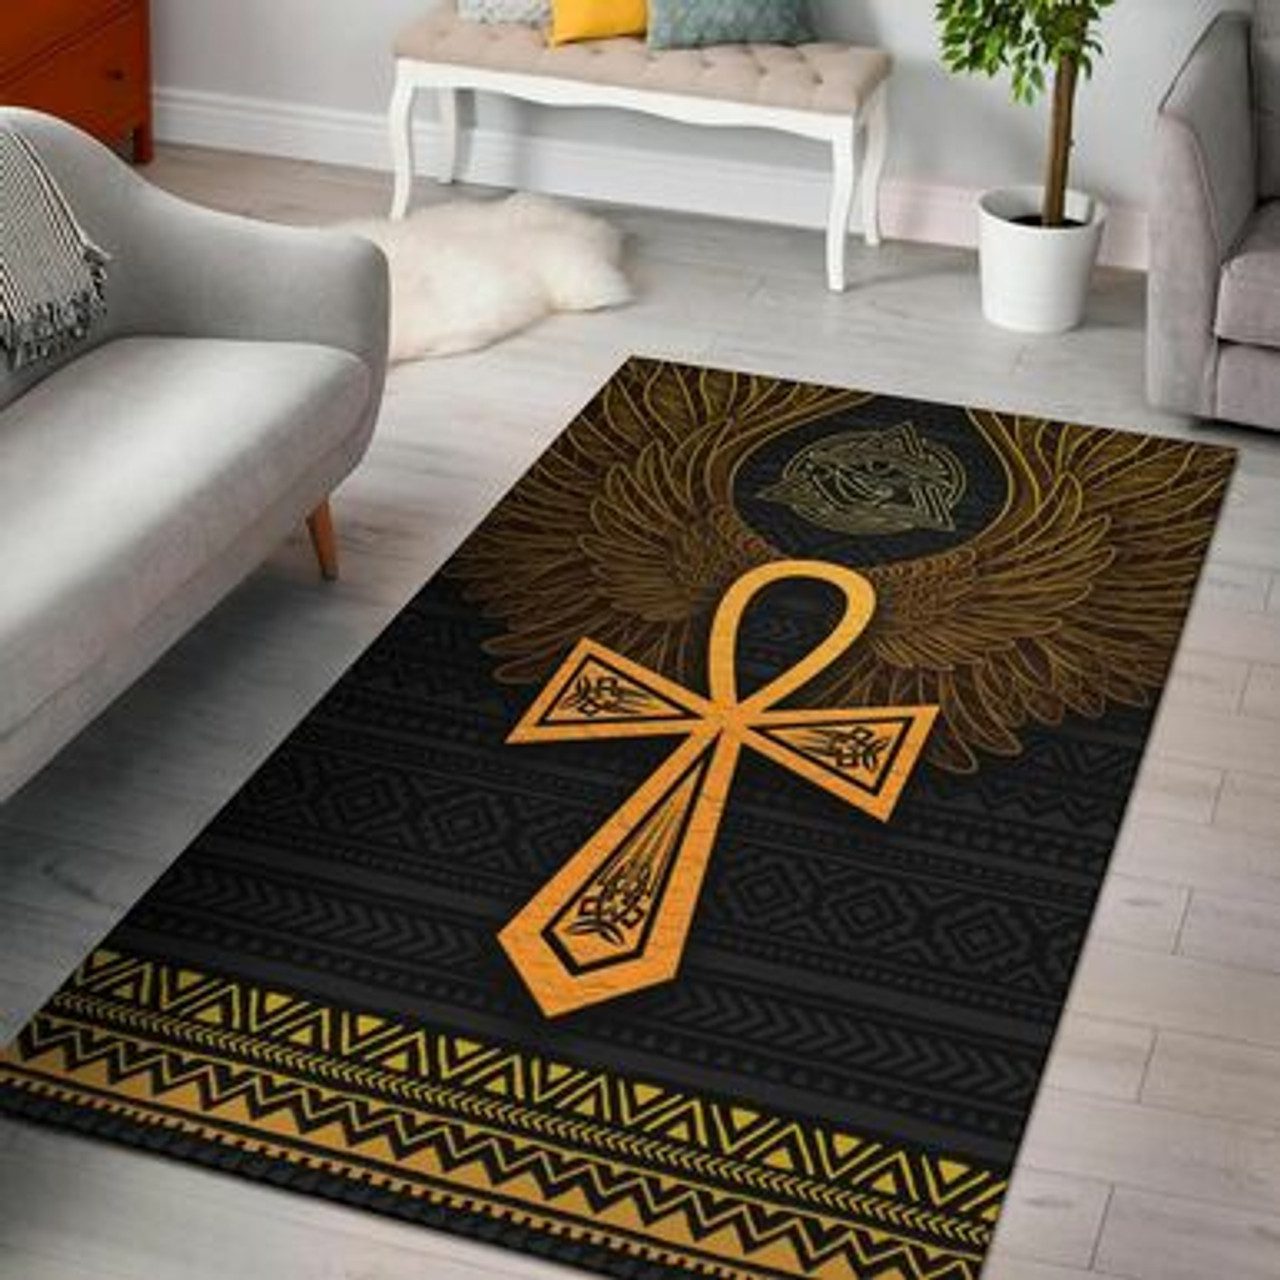 Egyptian Area Rug – African Patterns Ancient Egypt Ankh & Horus Wings Area Rug